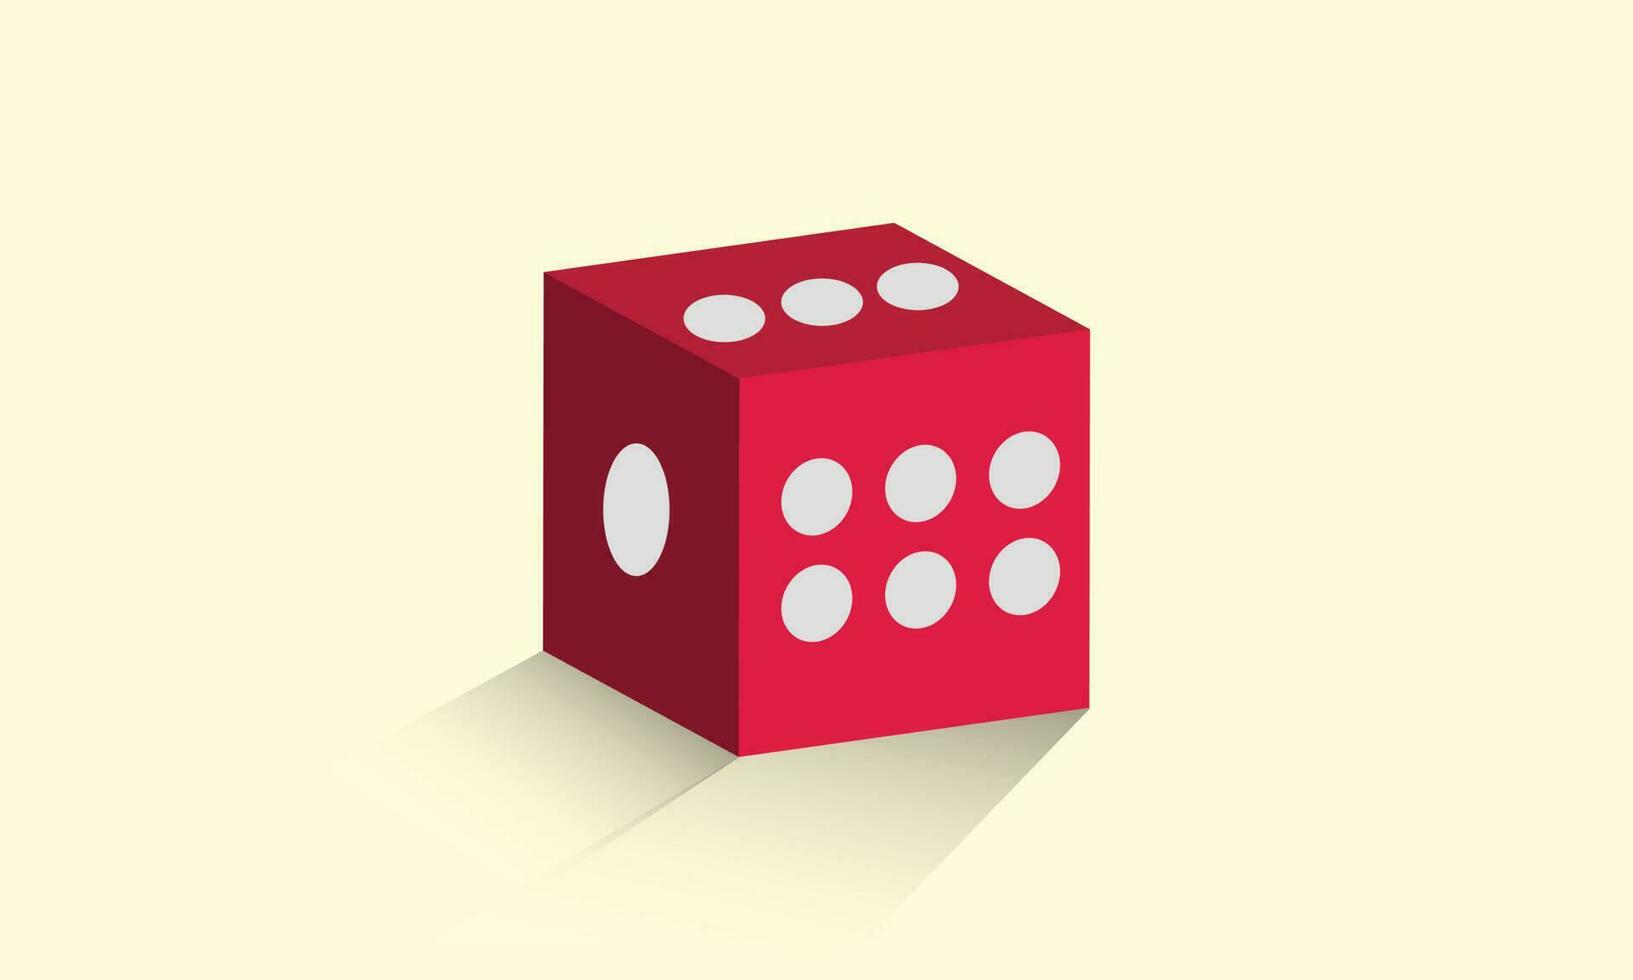 3d red dice design for gambling related illustration vector